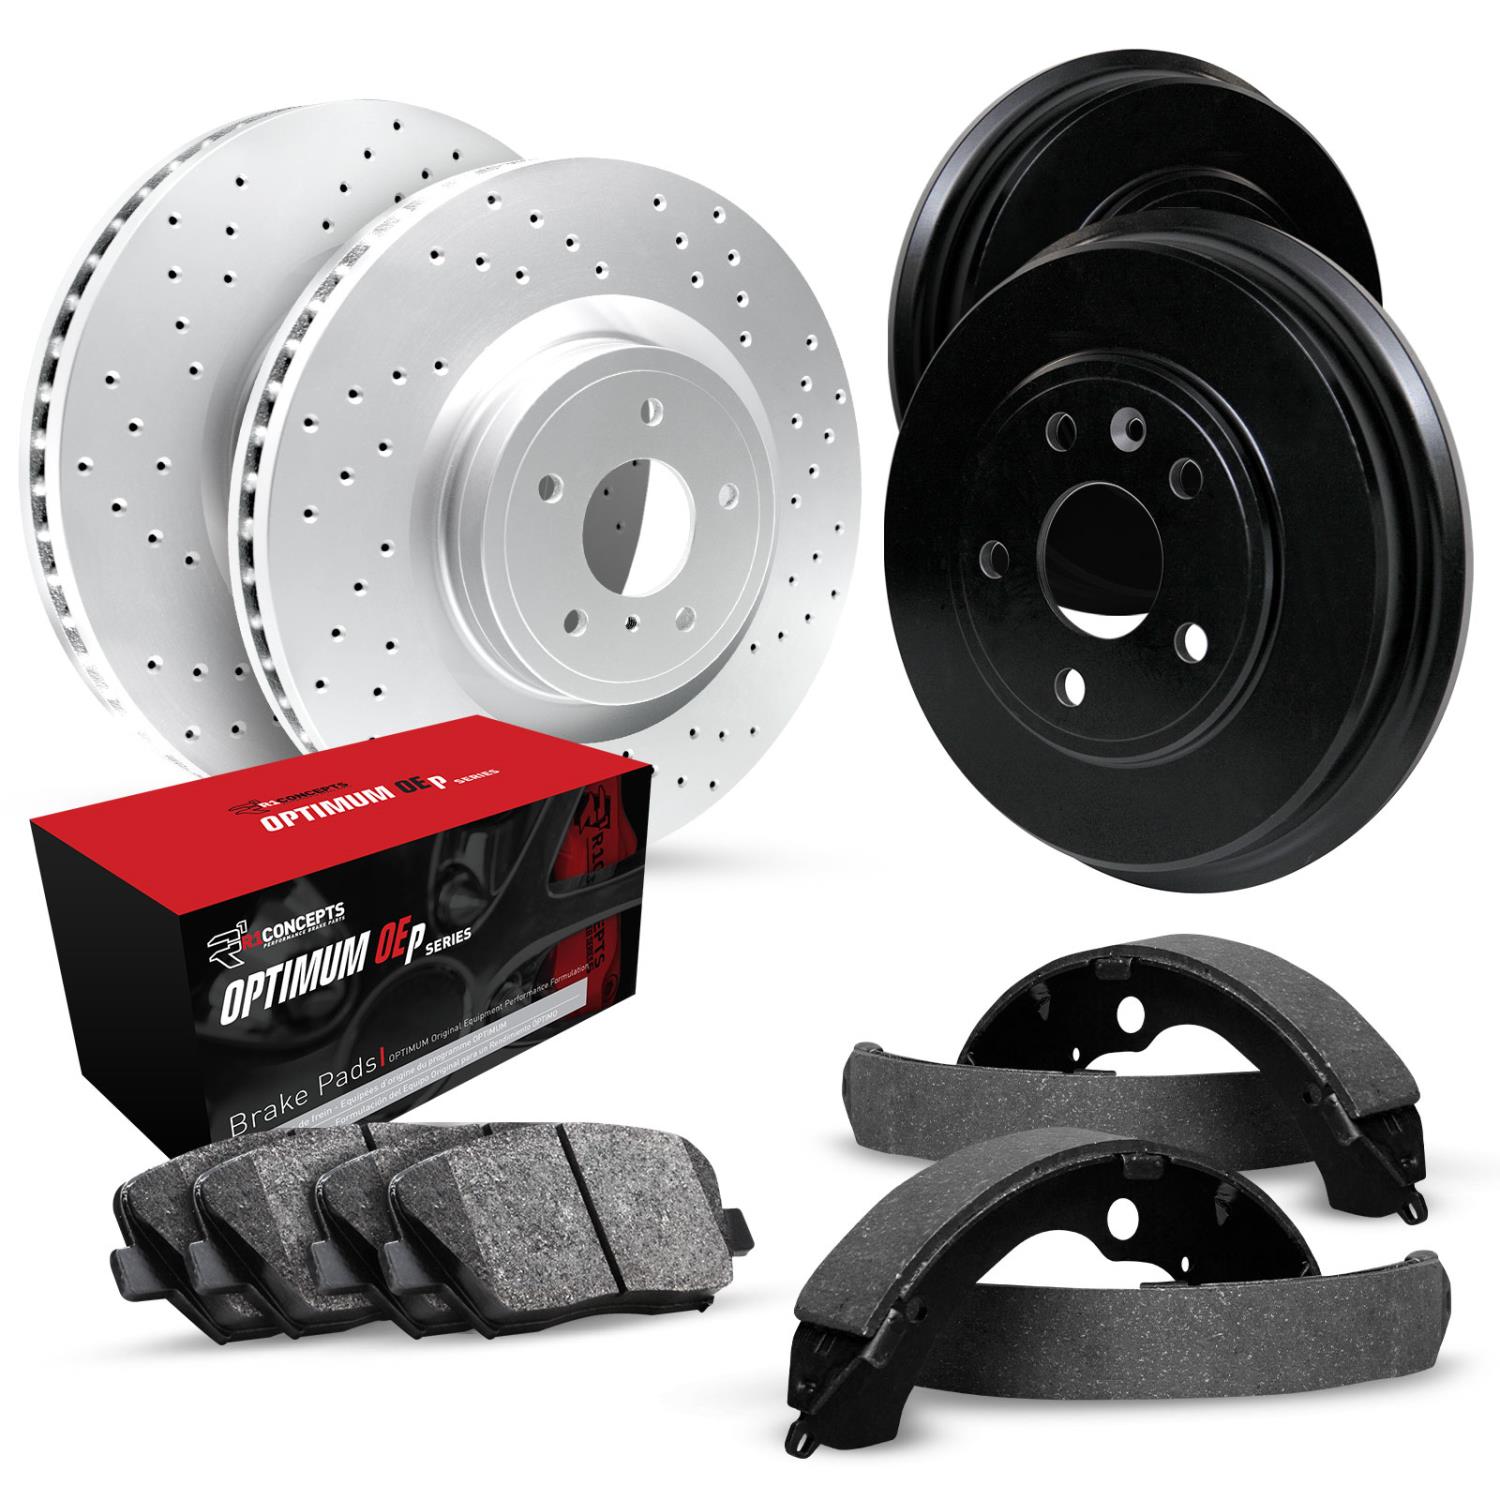 GEO-Carbon Drilled Brake Rotor & Drum Set w/Optimum OE Pads & Shoes, 2013-2019 Infiniti/Nissan, Position: Front & Rear